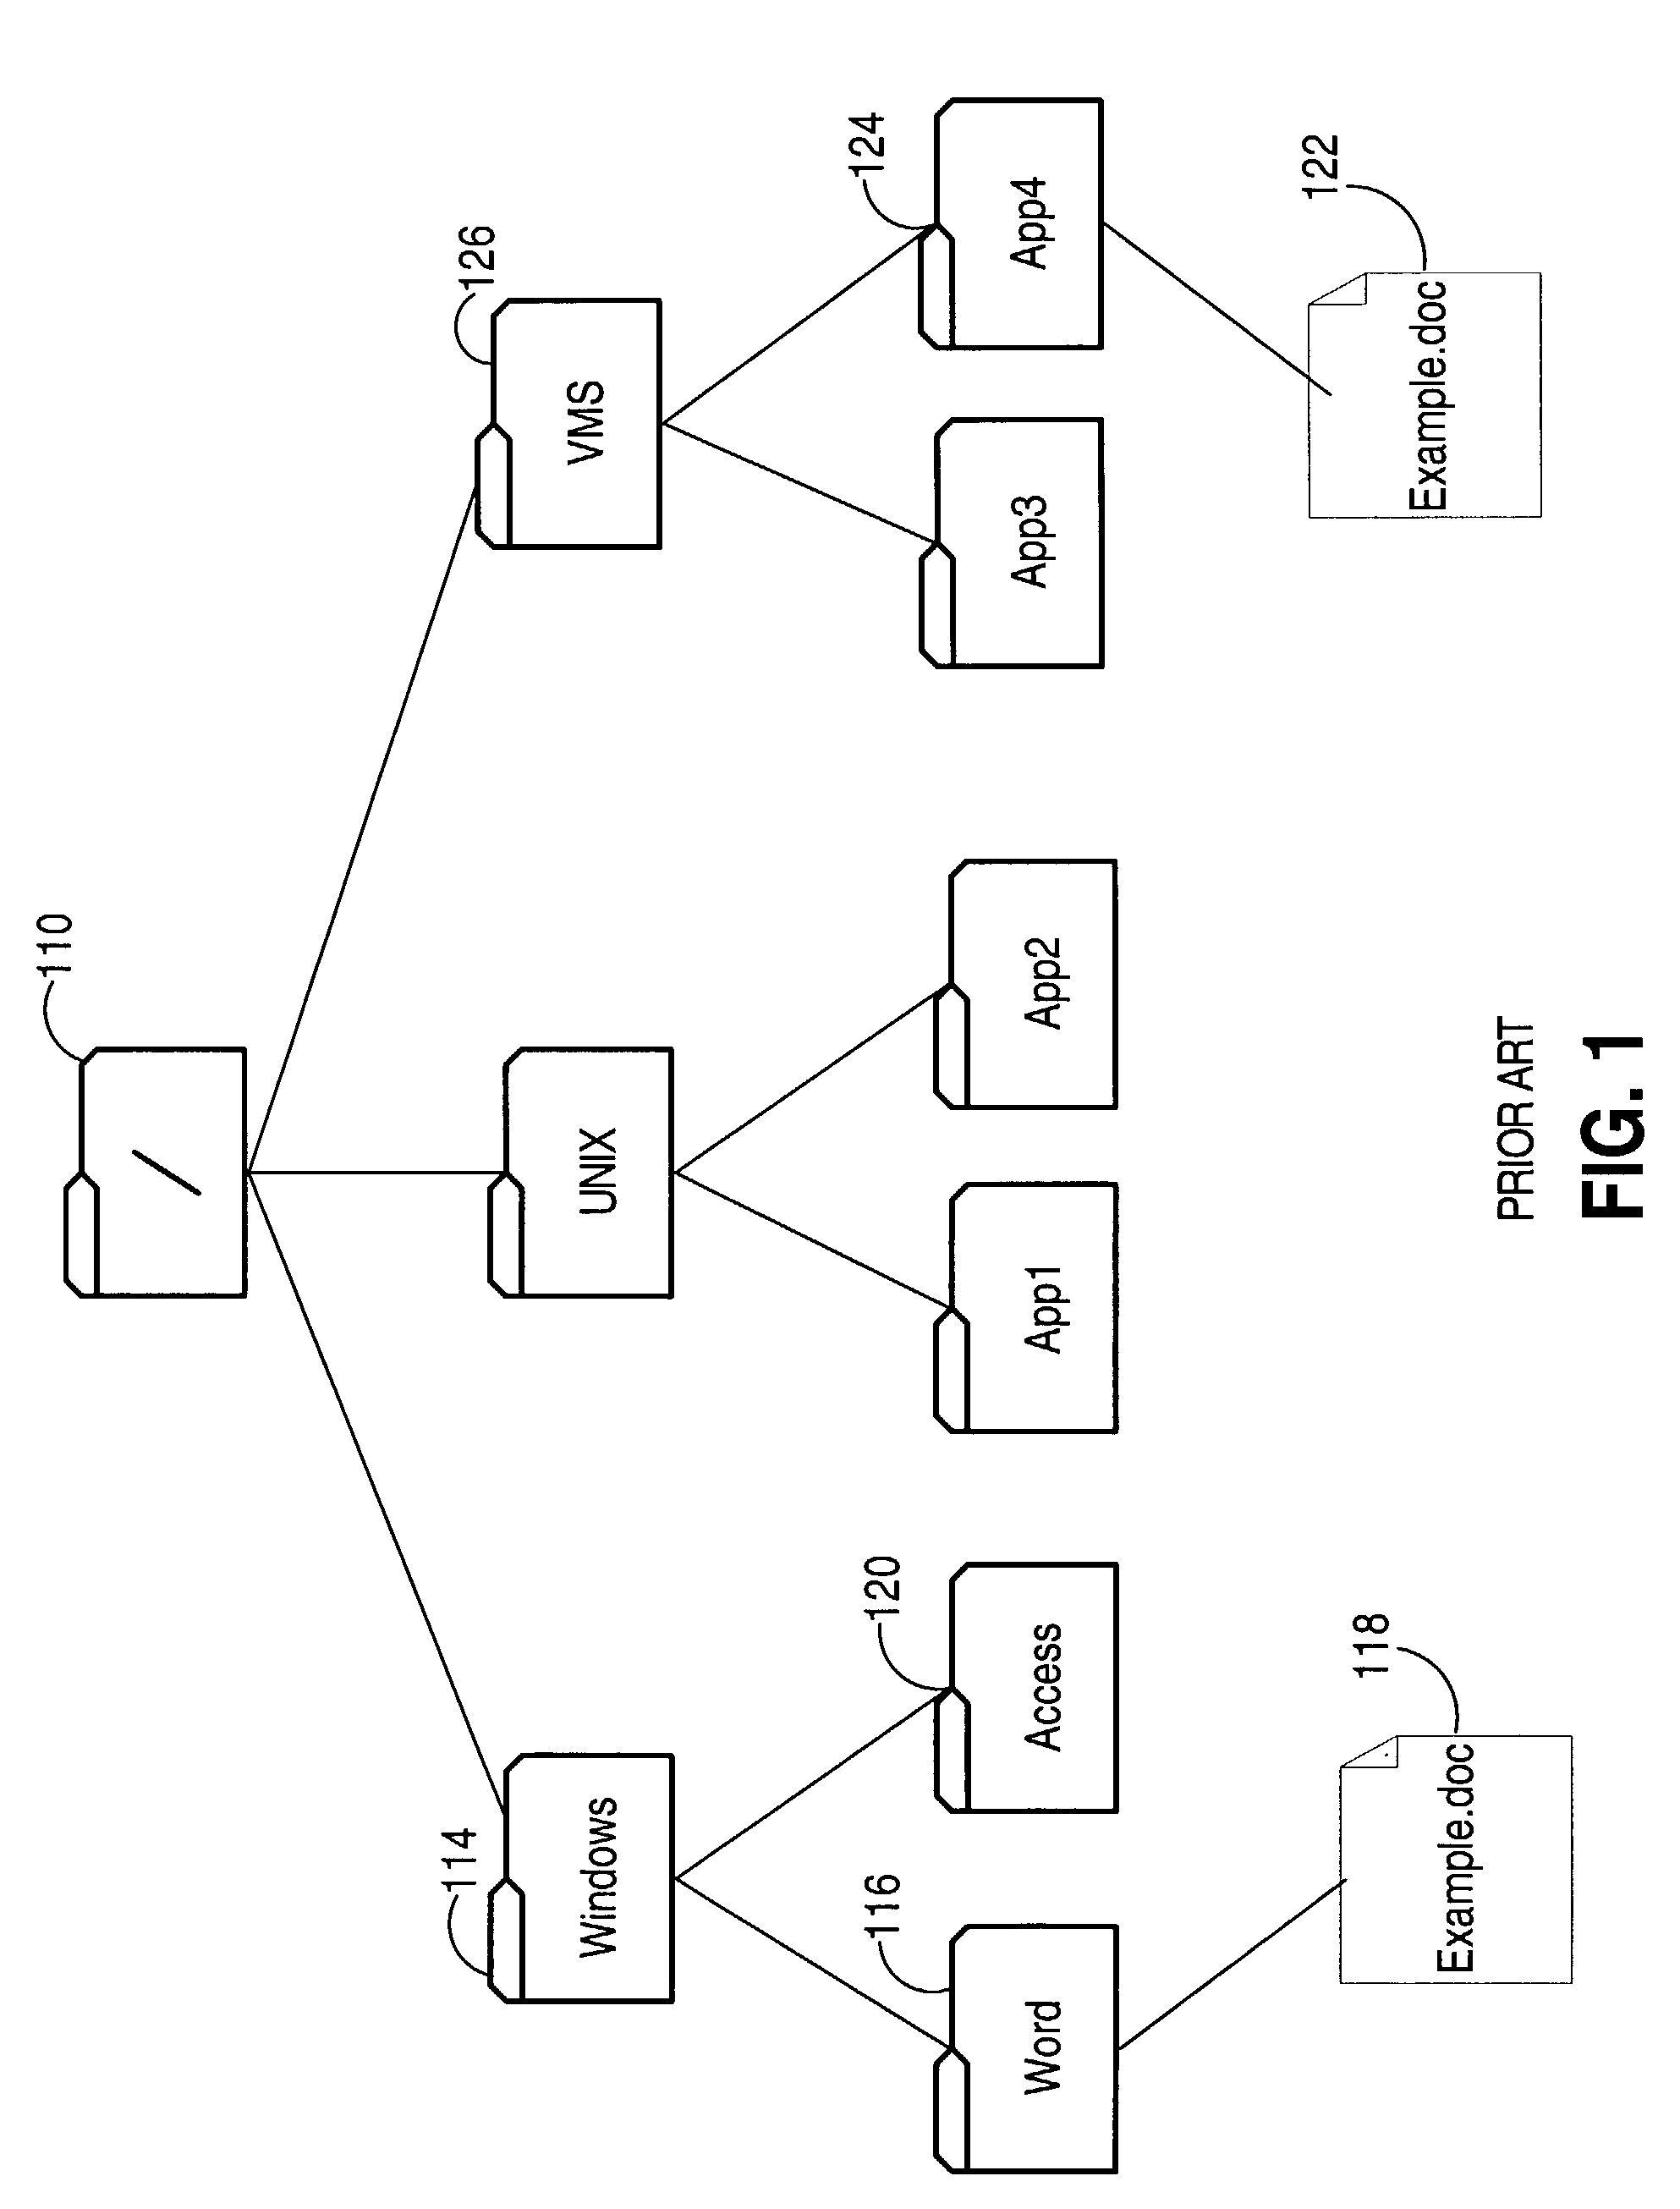 Operators for accessing hierarchical data in a relational system